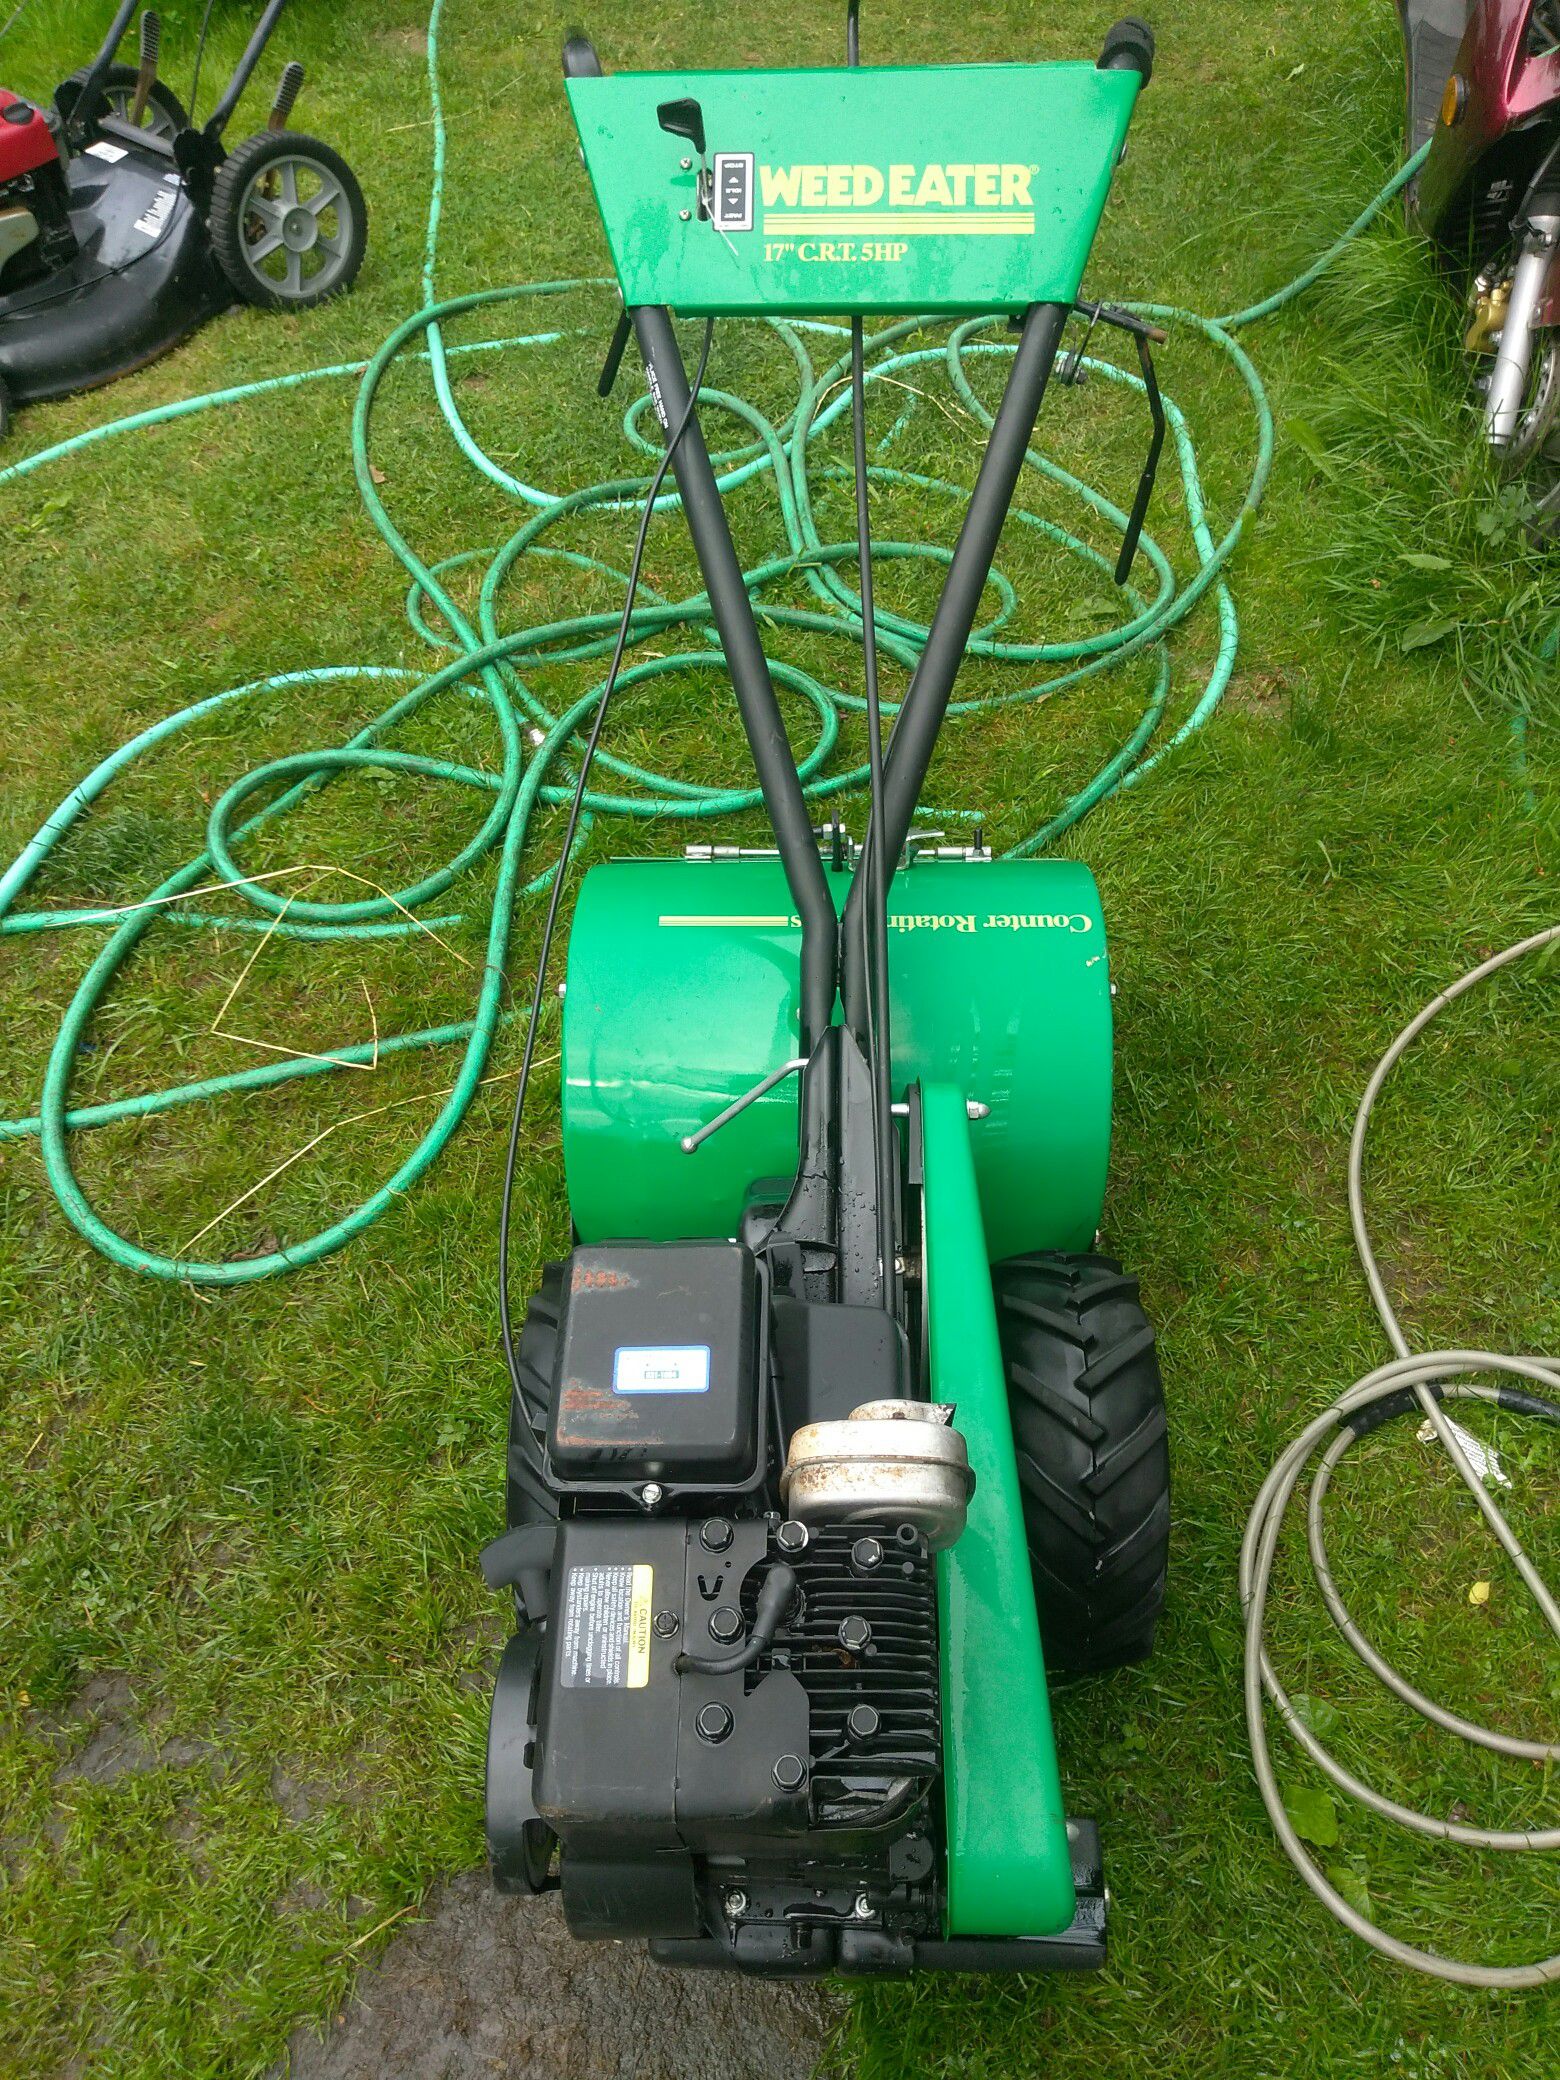 Weed eater 17 inch CRT 5 horsepower rototiller with counter rotating tines